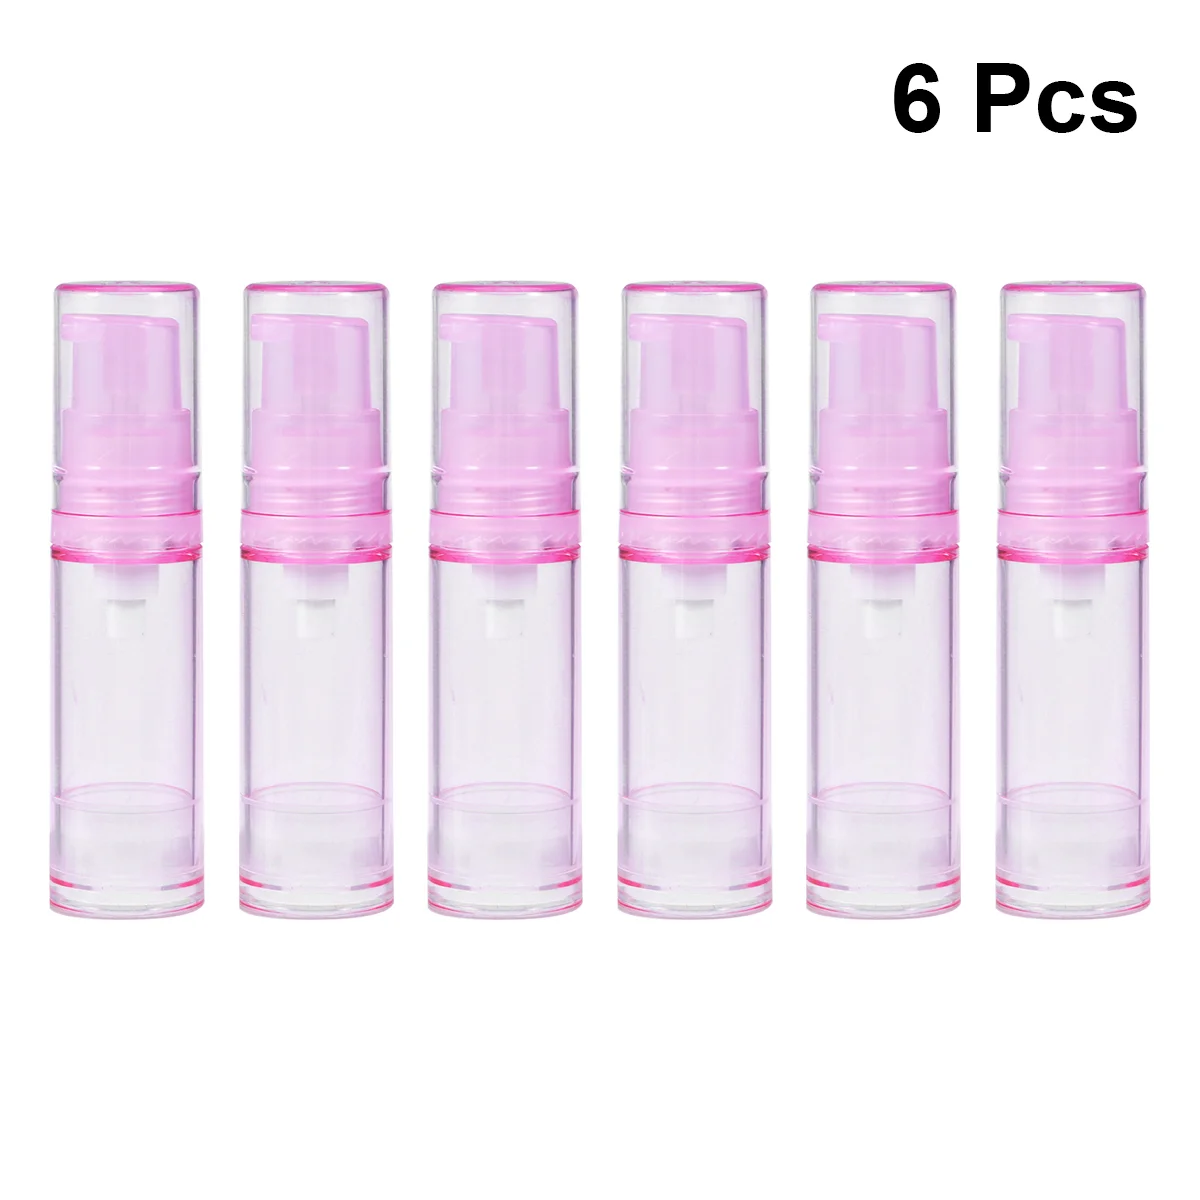 

Pumpfor Bottles Bottle Containers Oz Foundation Creamslotions Toiletries Dispenser Airless 12 Lotion Refillable Containervacuum